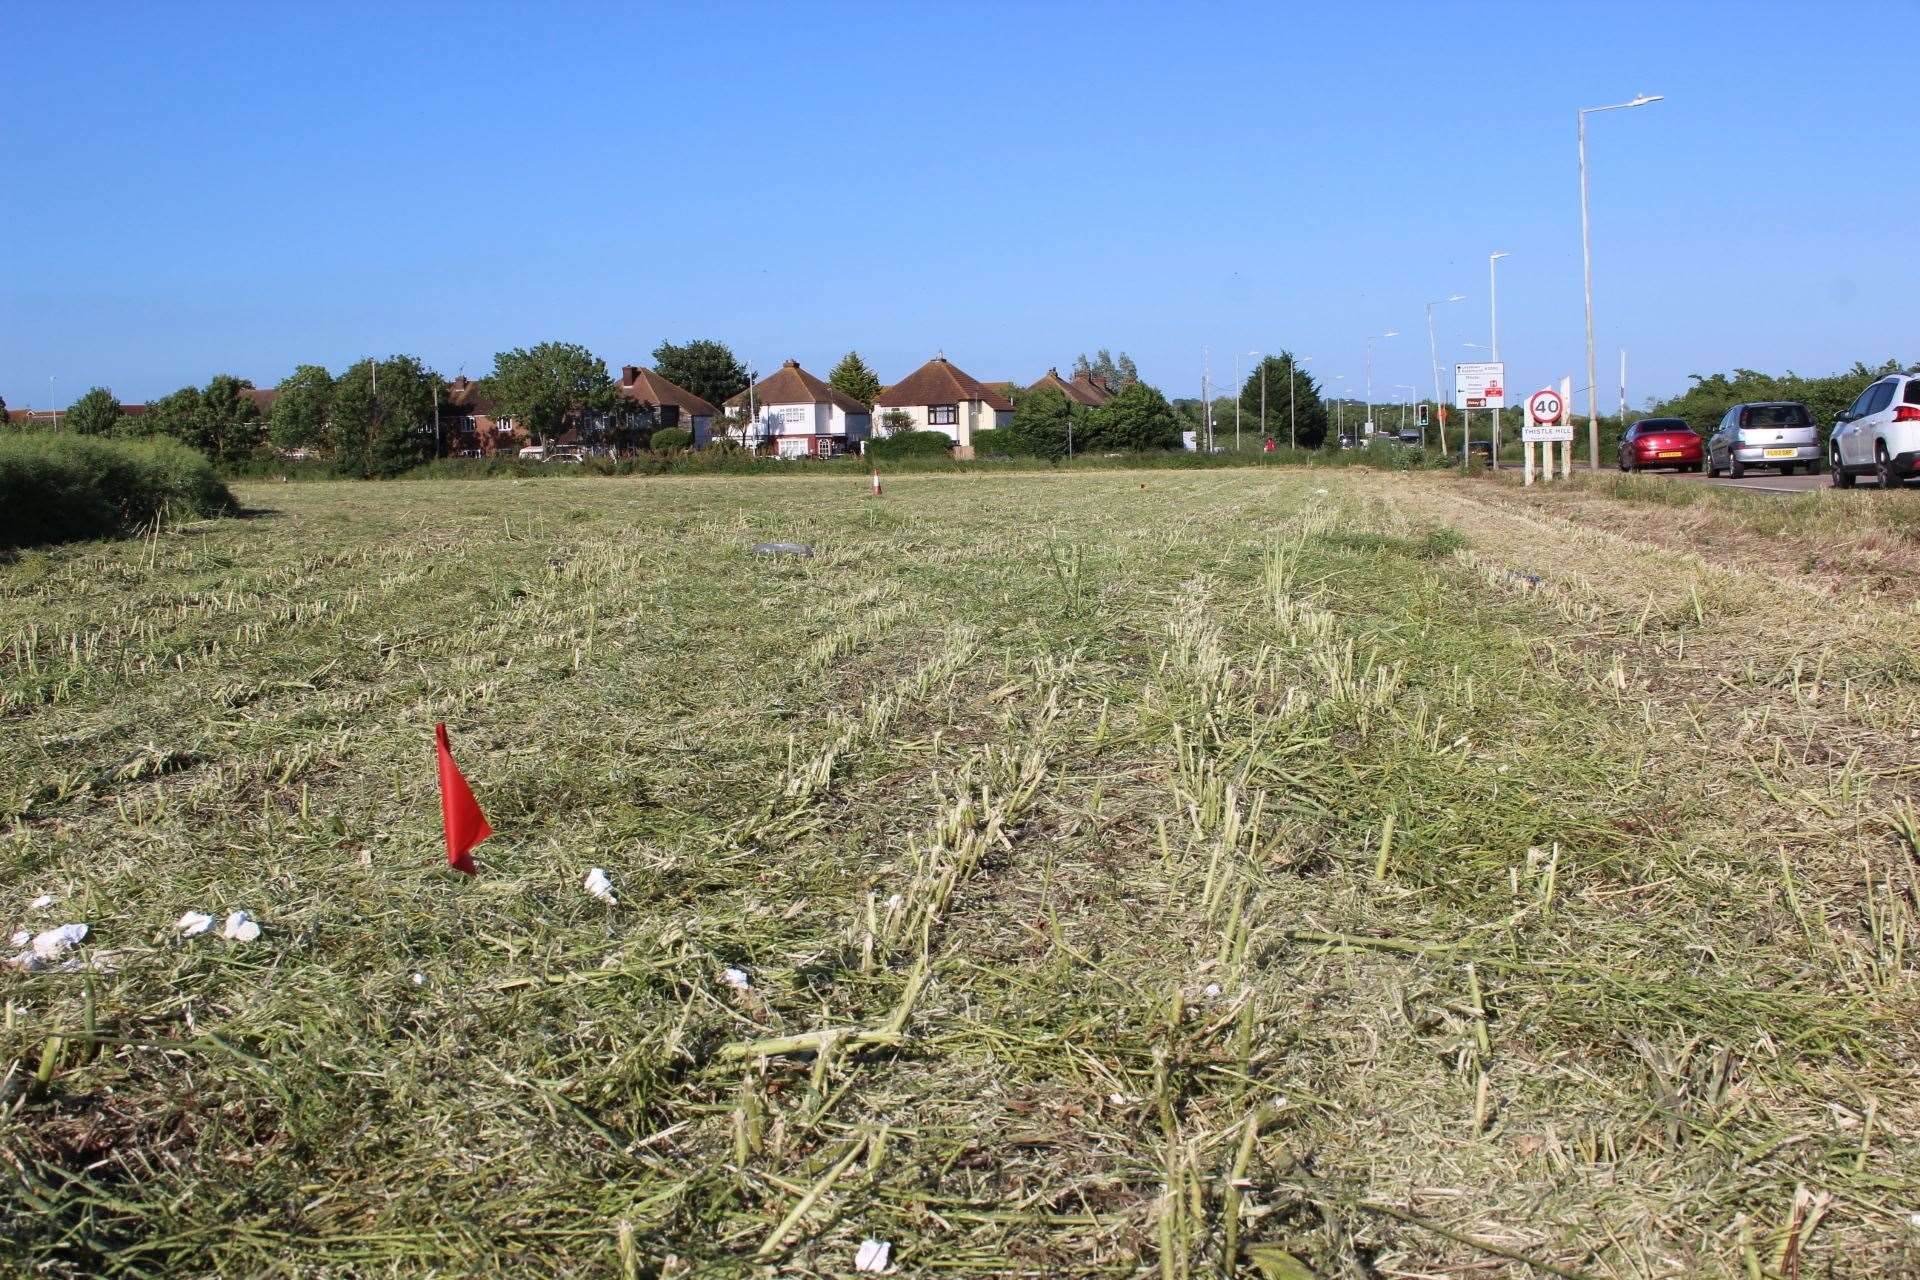 The homes had been proposed for this field along the Lower Road